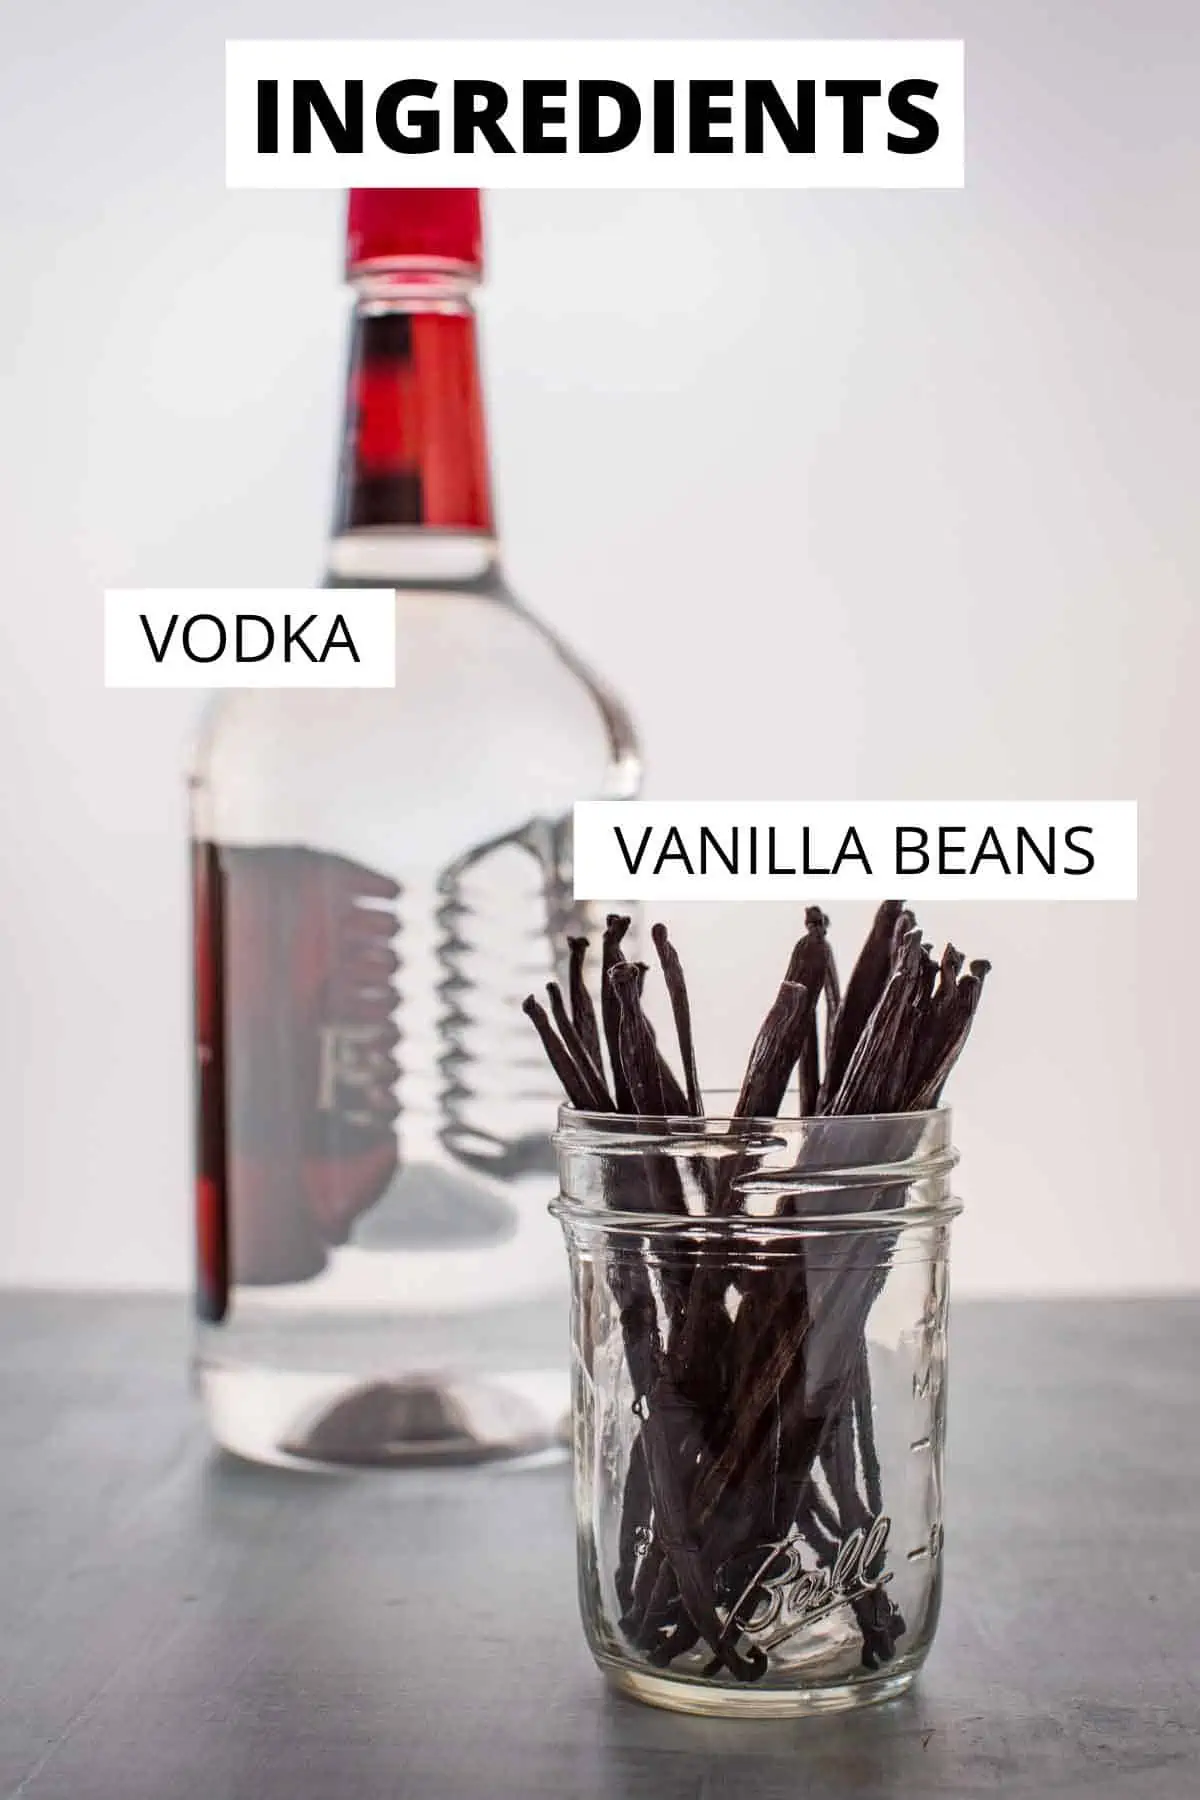 Vodka and vanilla beans - ingredients for homemade vanilla extract.